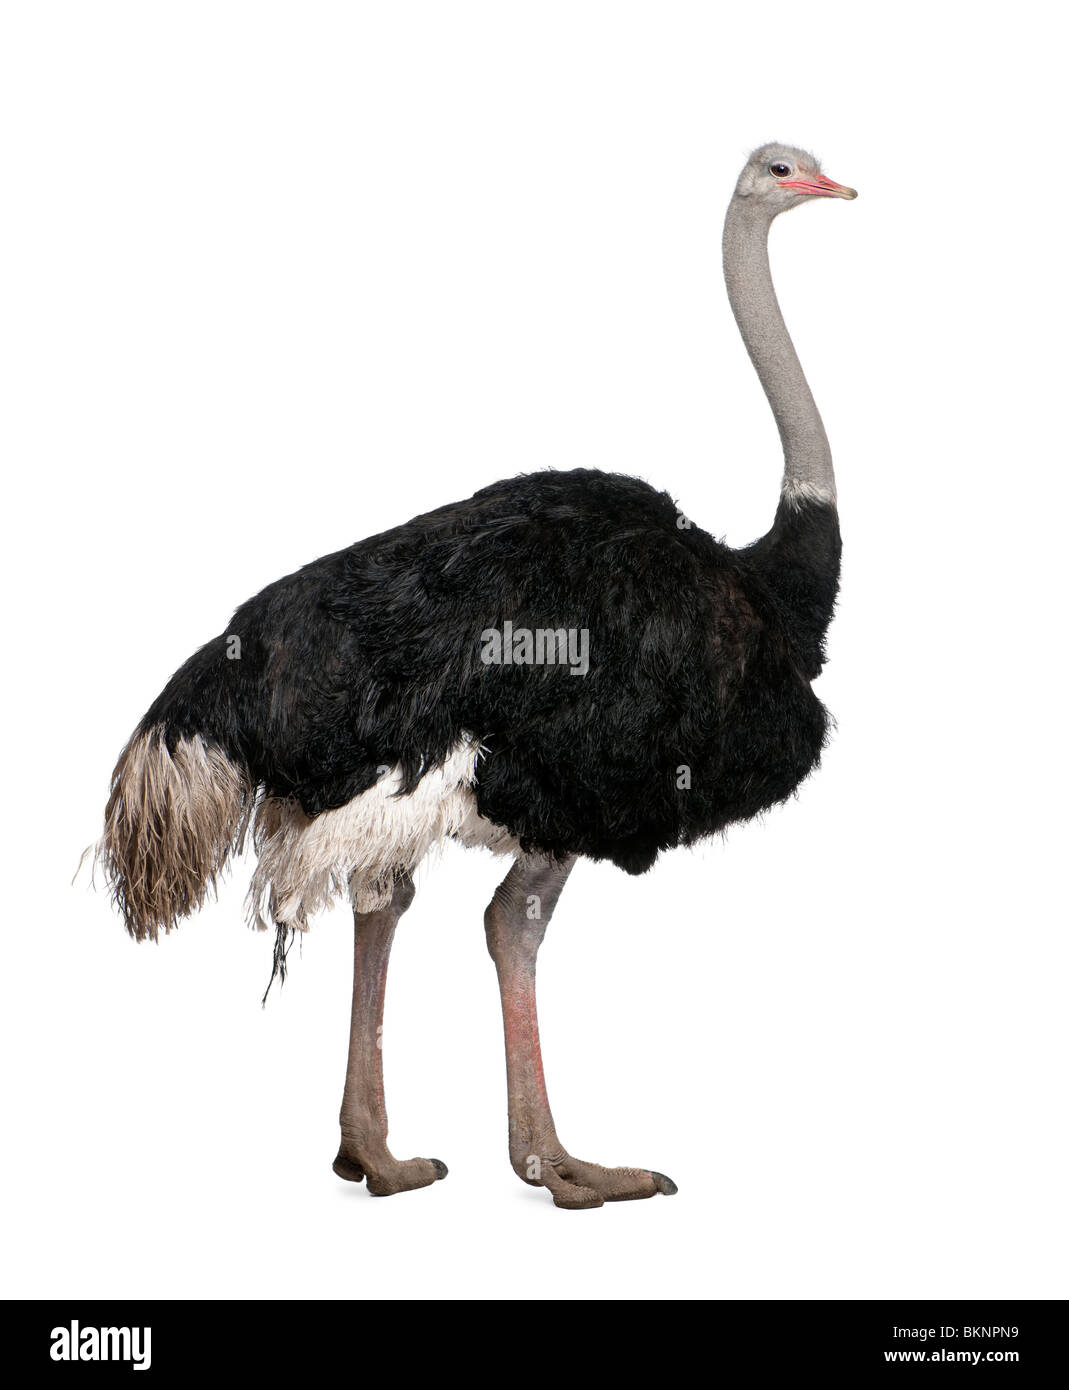 Male ostrich, Struthio camelus, standing in front of a white background, studio shot Stock Photo